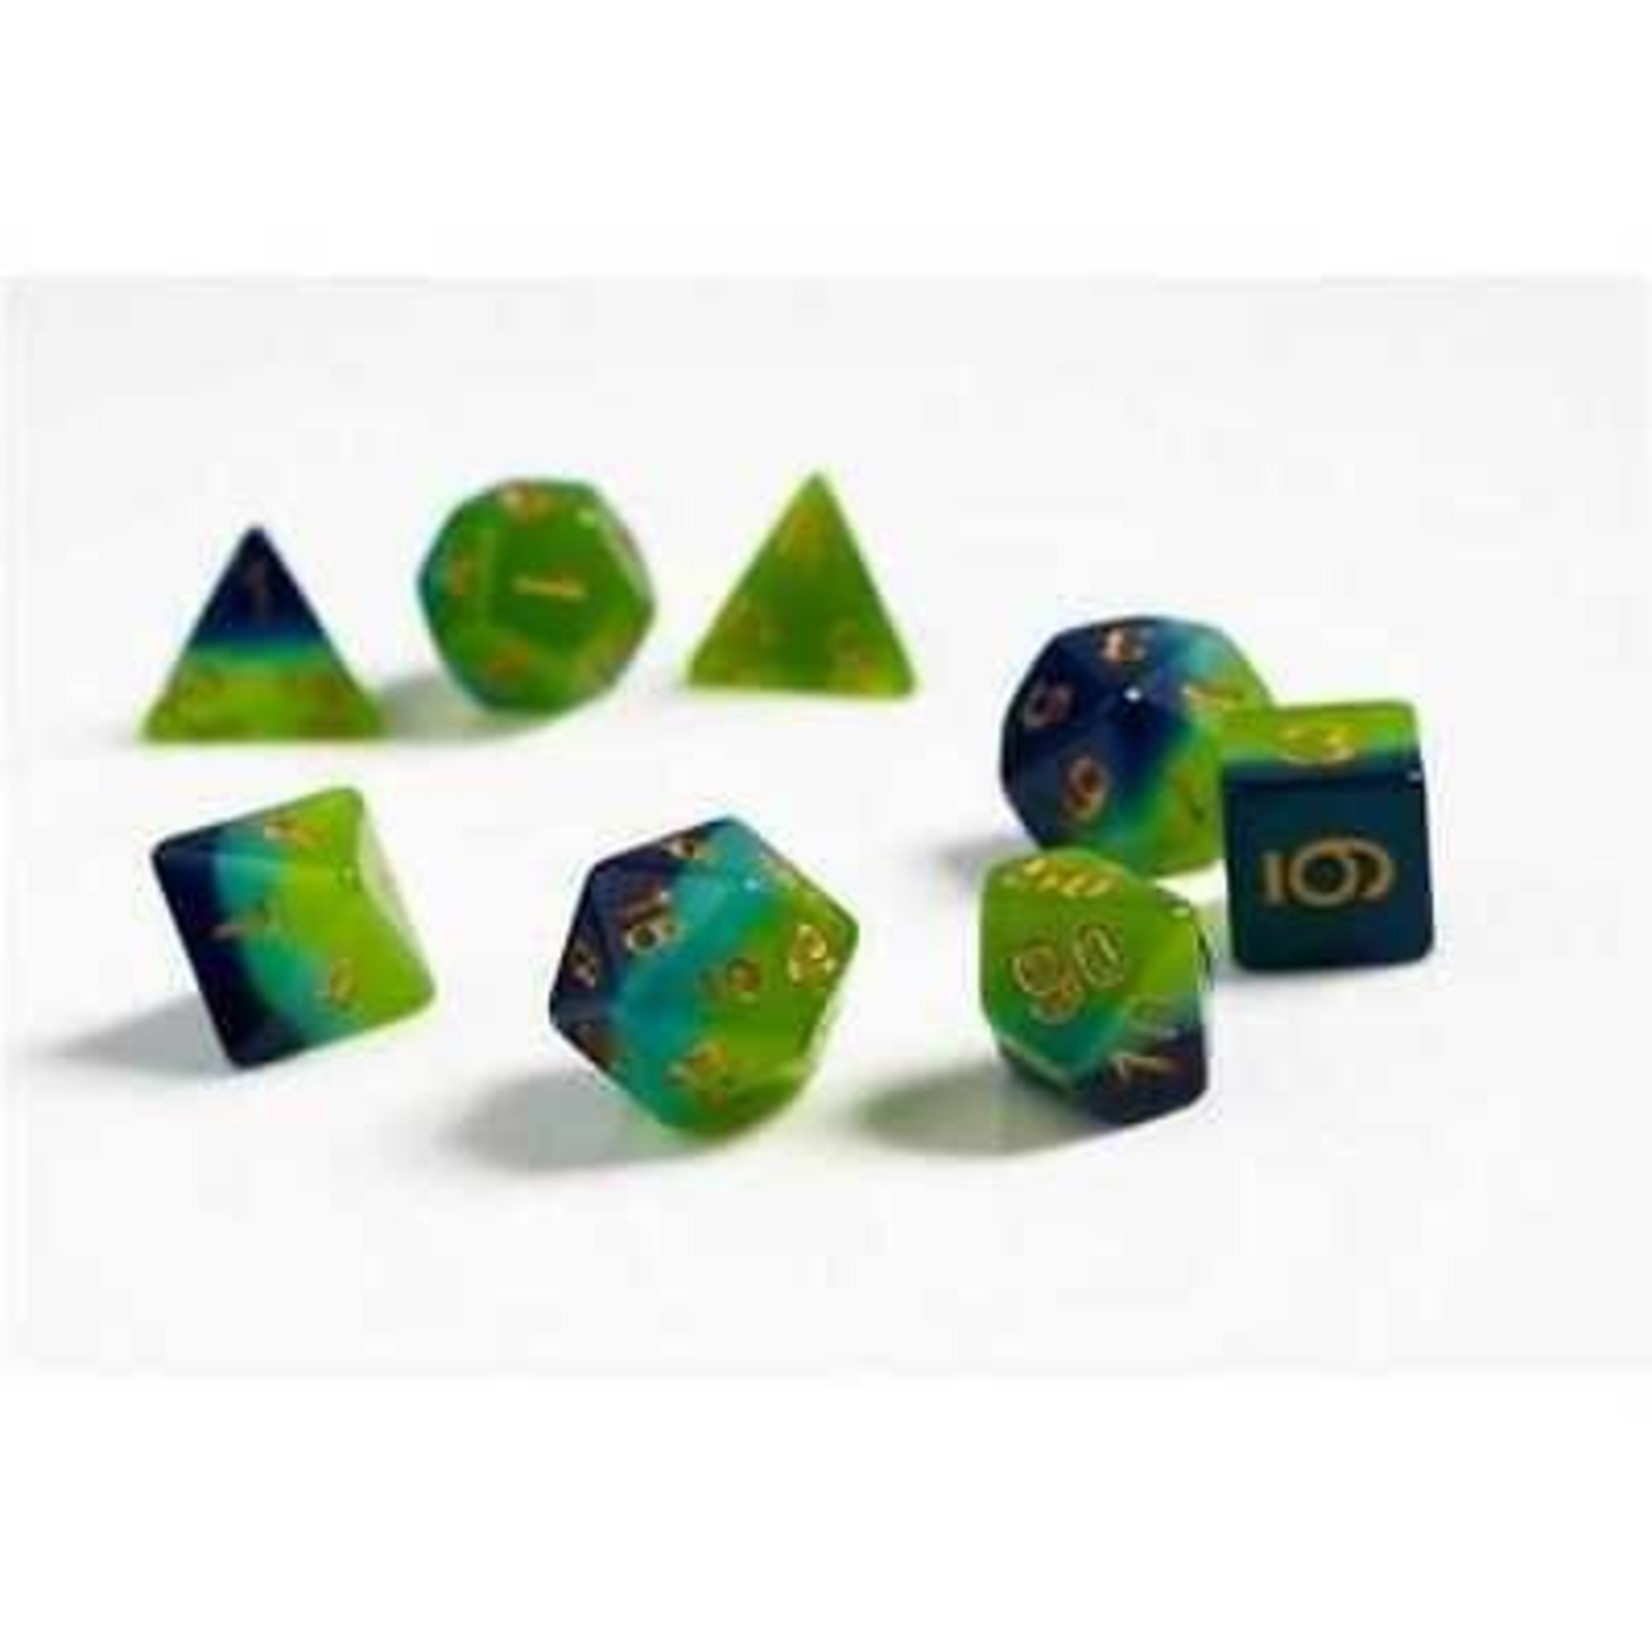 Sirius RPG Dice Translucent Green / Blue with Yellow Polyhedral 8 die set